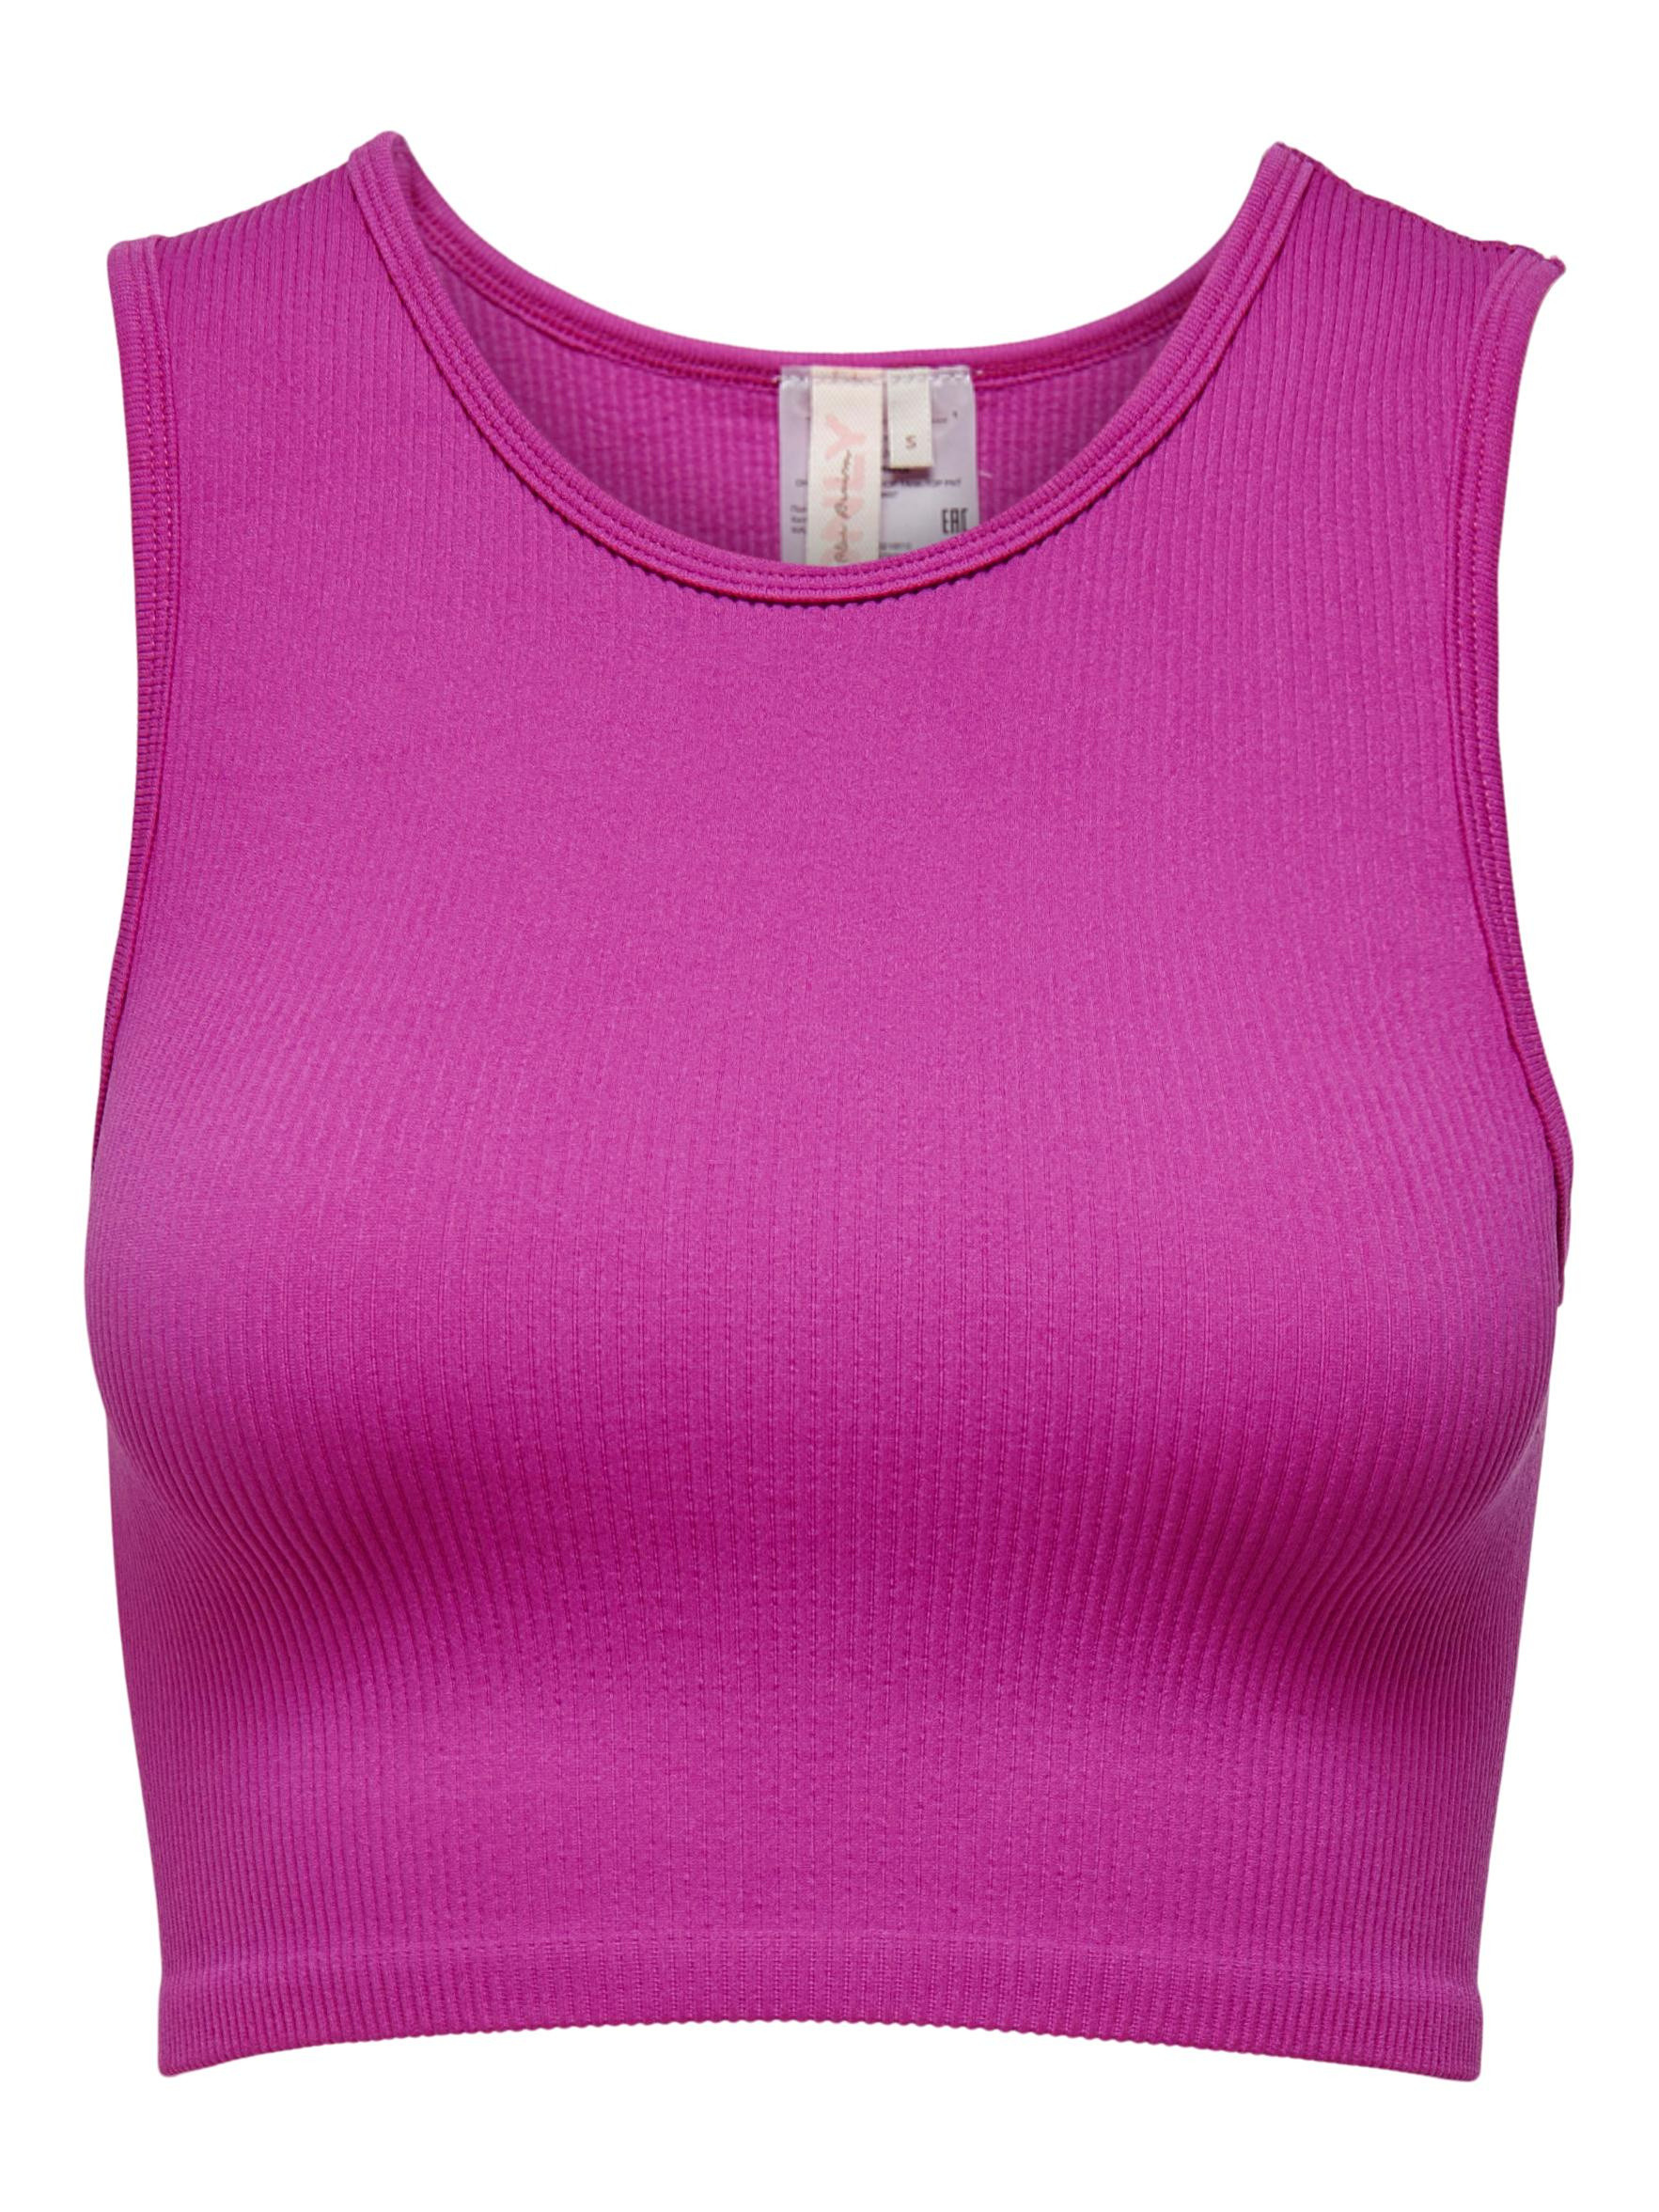 Only - Stretch-fit top, Pink Peony, large image number 0